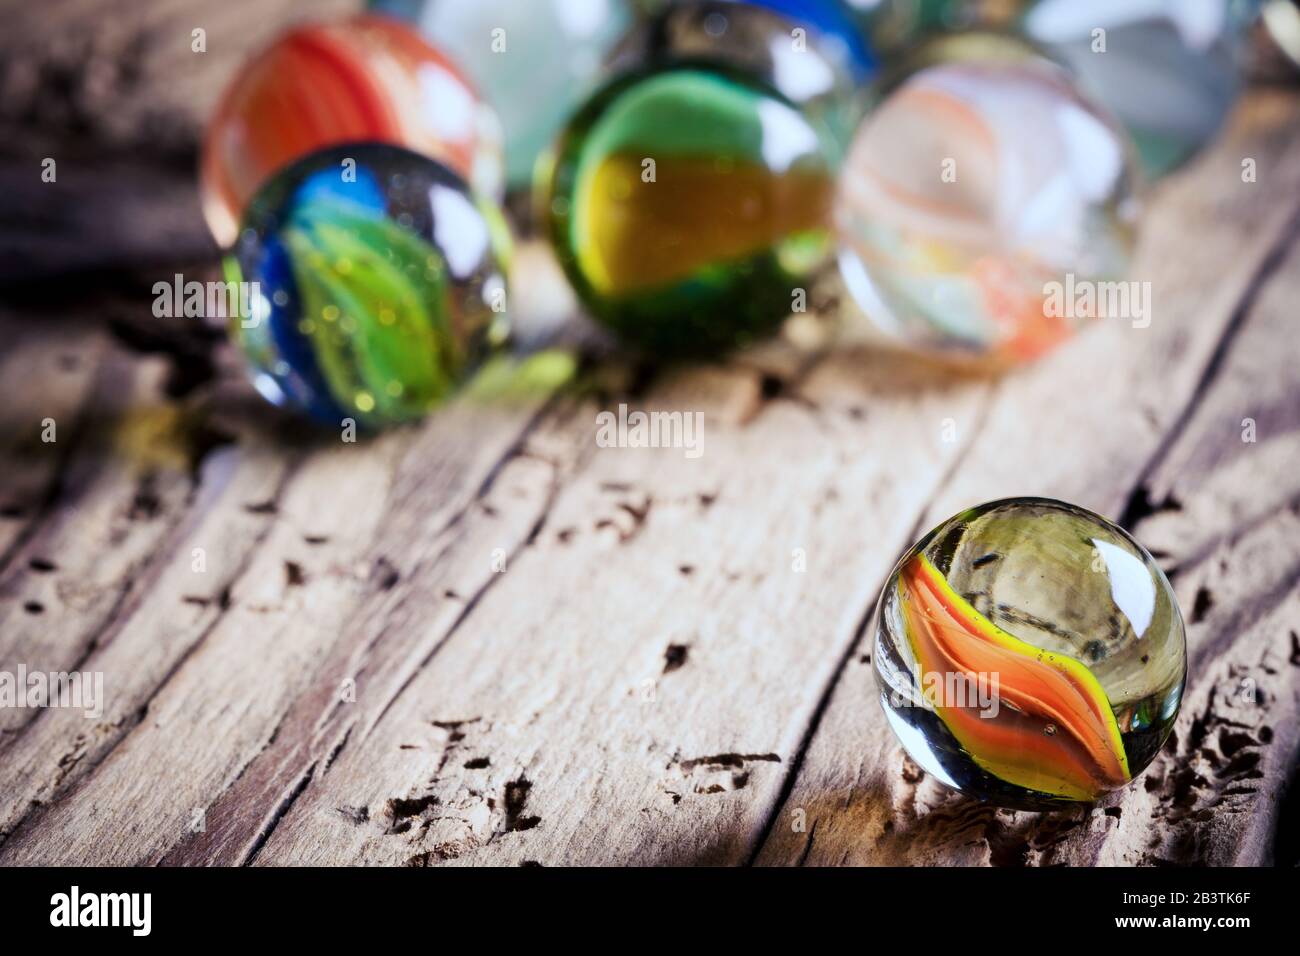 glass marbles on wood - close up Stock Photo